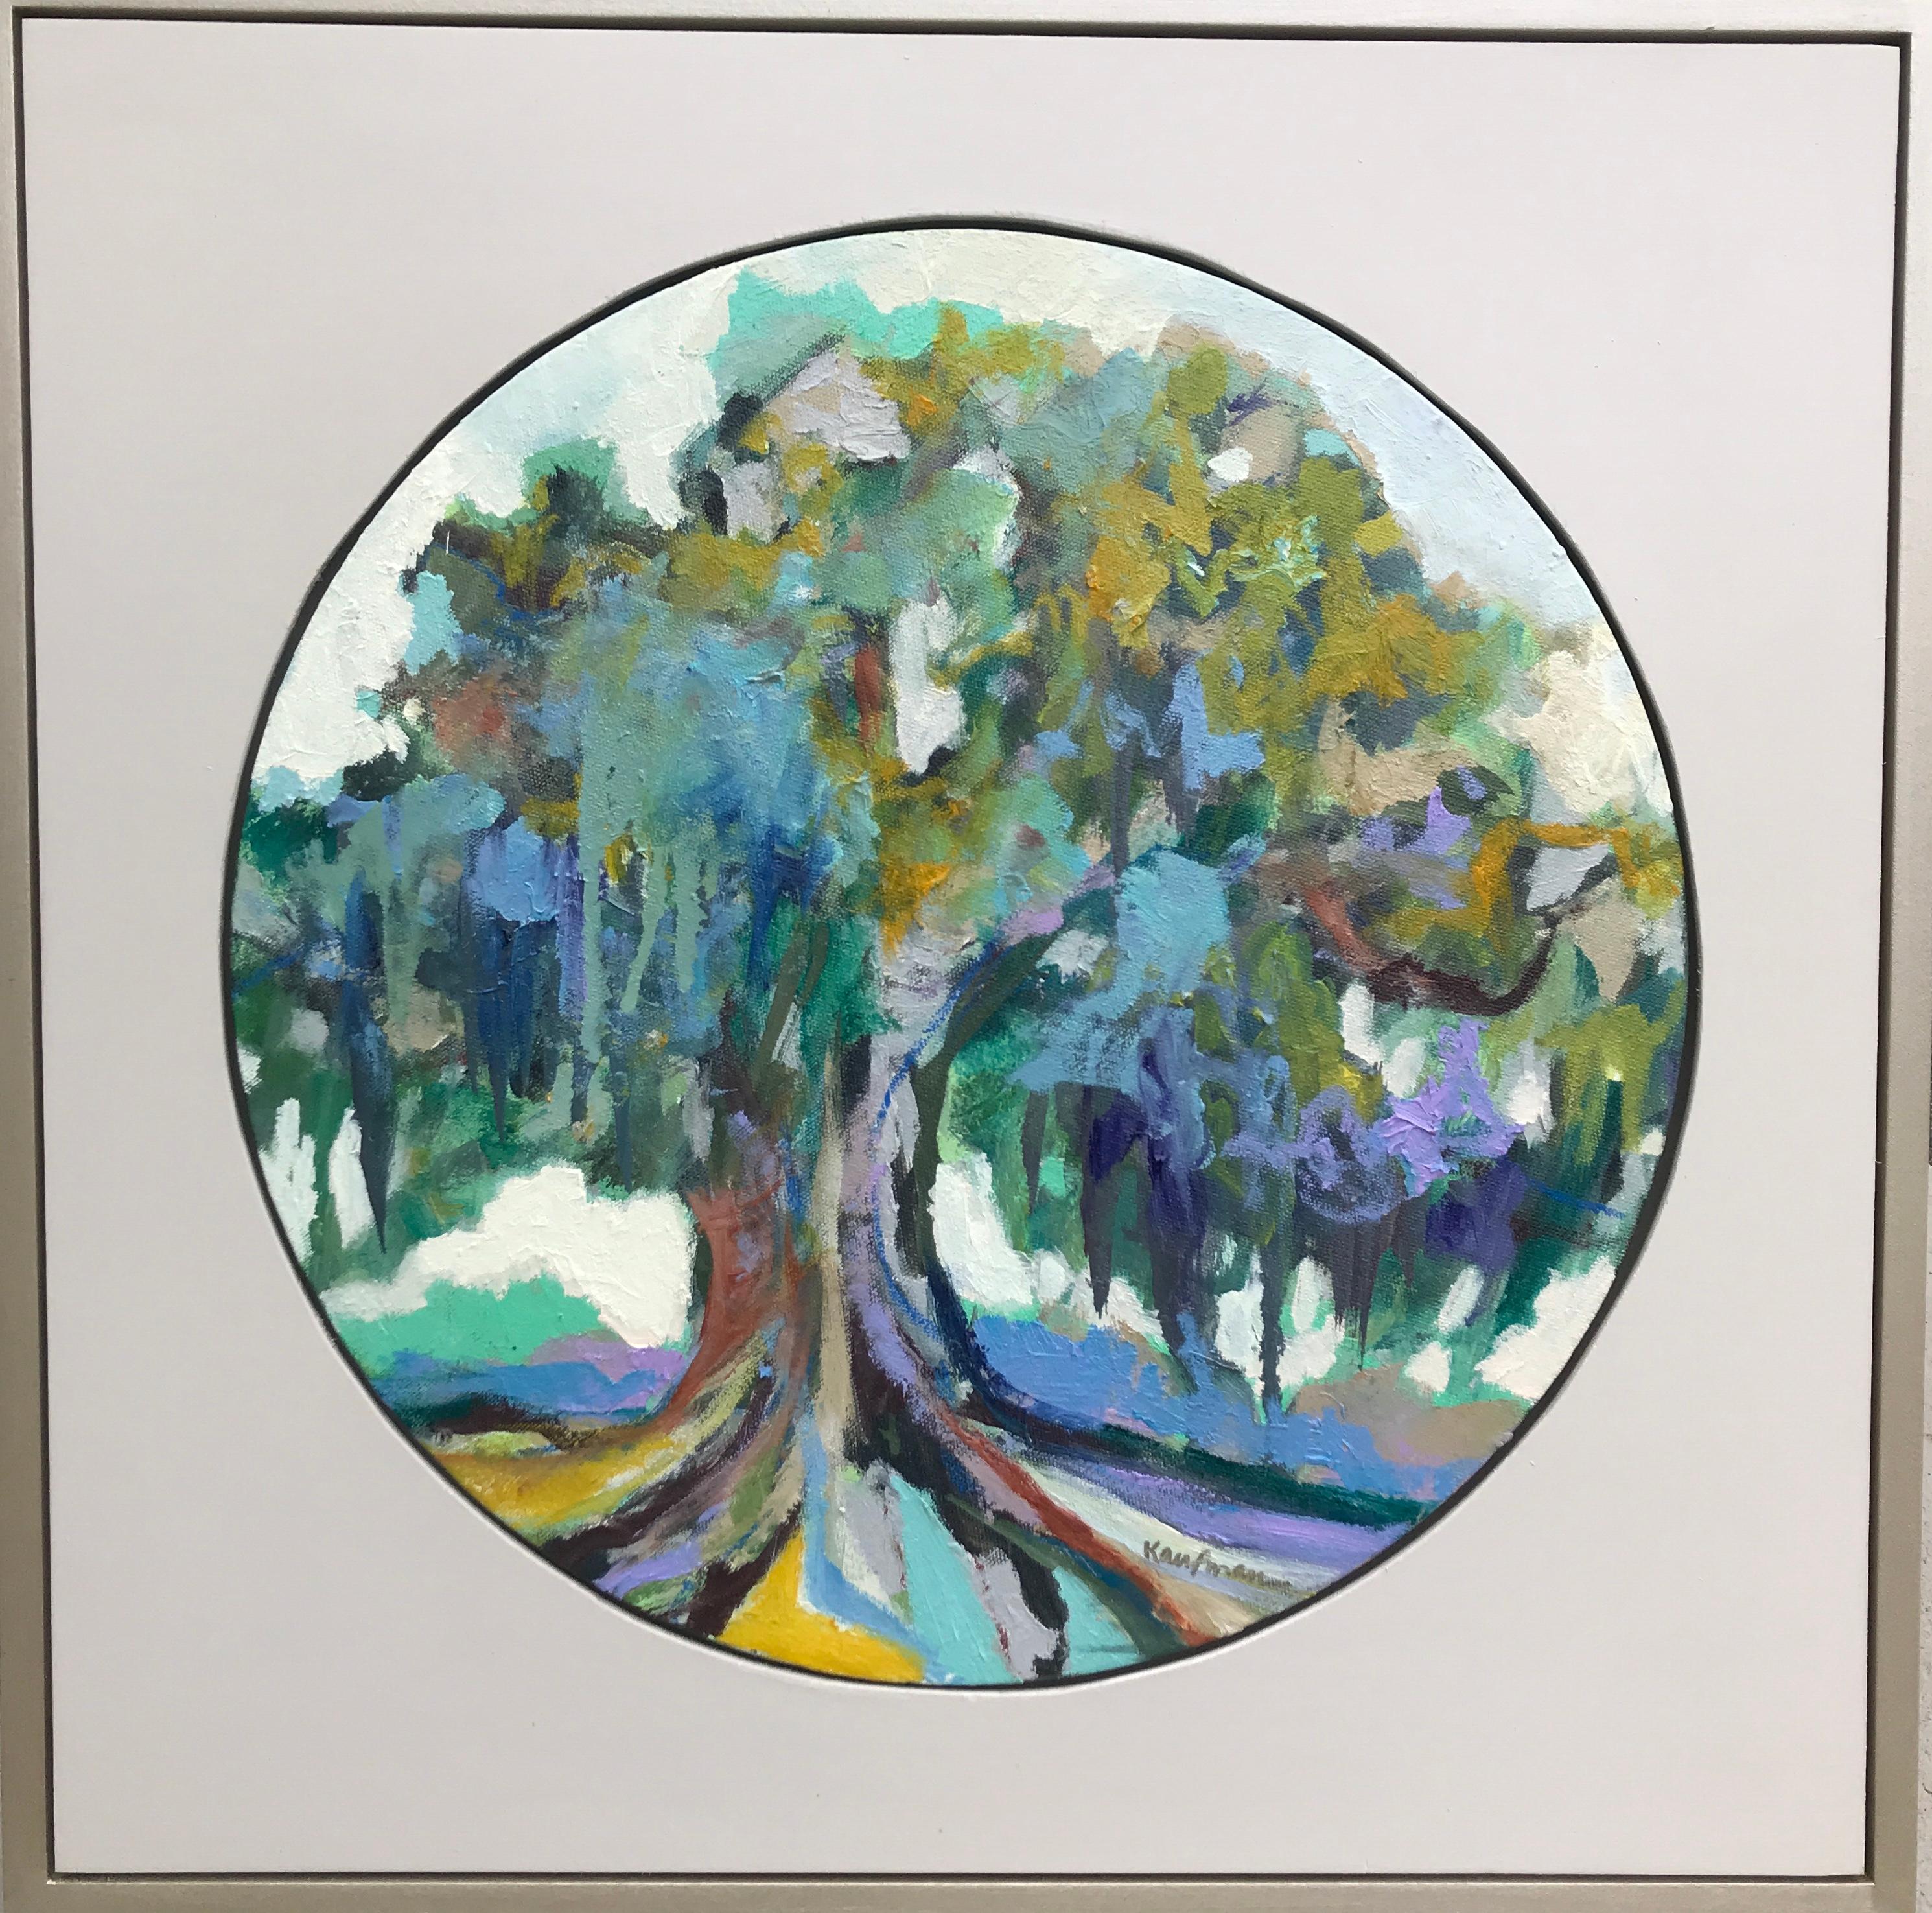 'Oak II' is a small contemporary oil and wax on canvas circular landscape painting set inside a square frame, created by American artist Kelli Kaufman in 2018. Featuring an exquisite palette made of a lovely tonality of blue, purple, green and